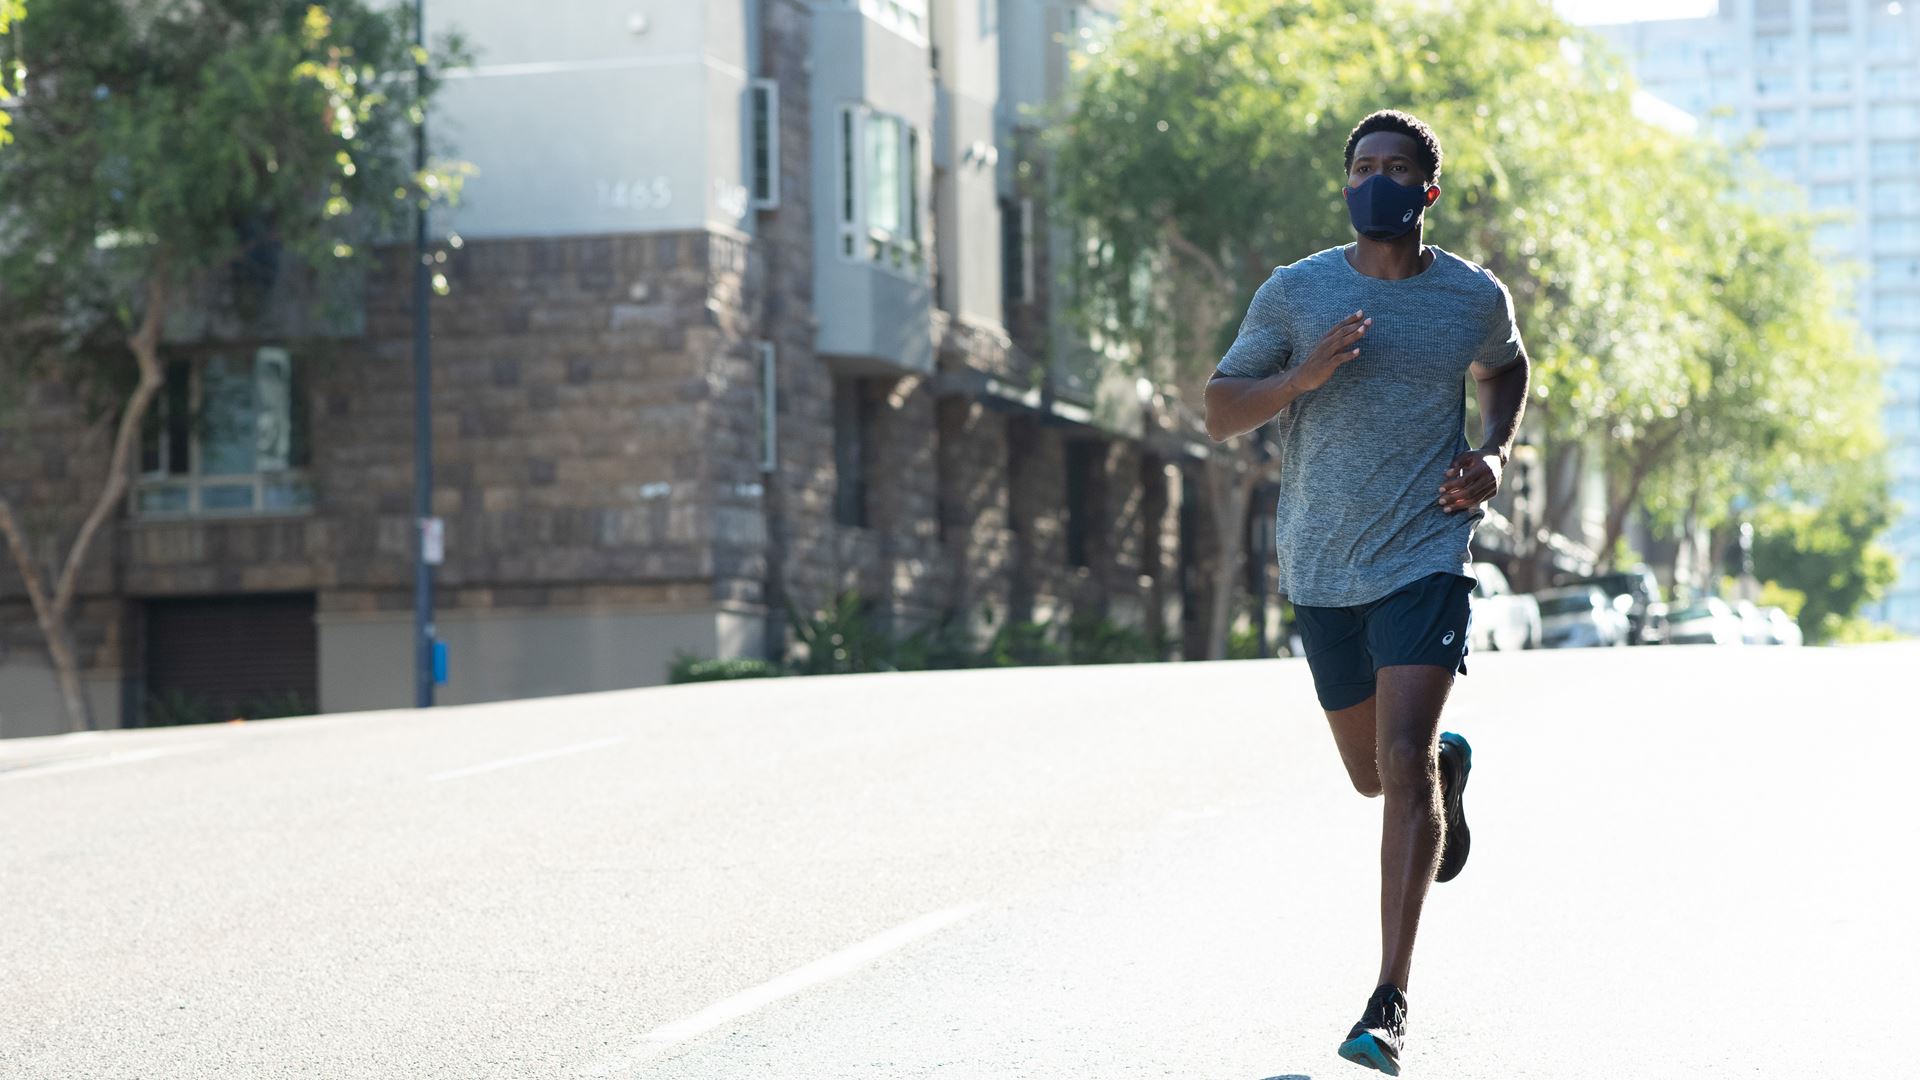 ASICS announces ground-breaking performance face cover that gives runners breathing room to maintain their edge